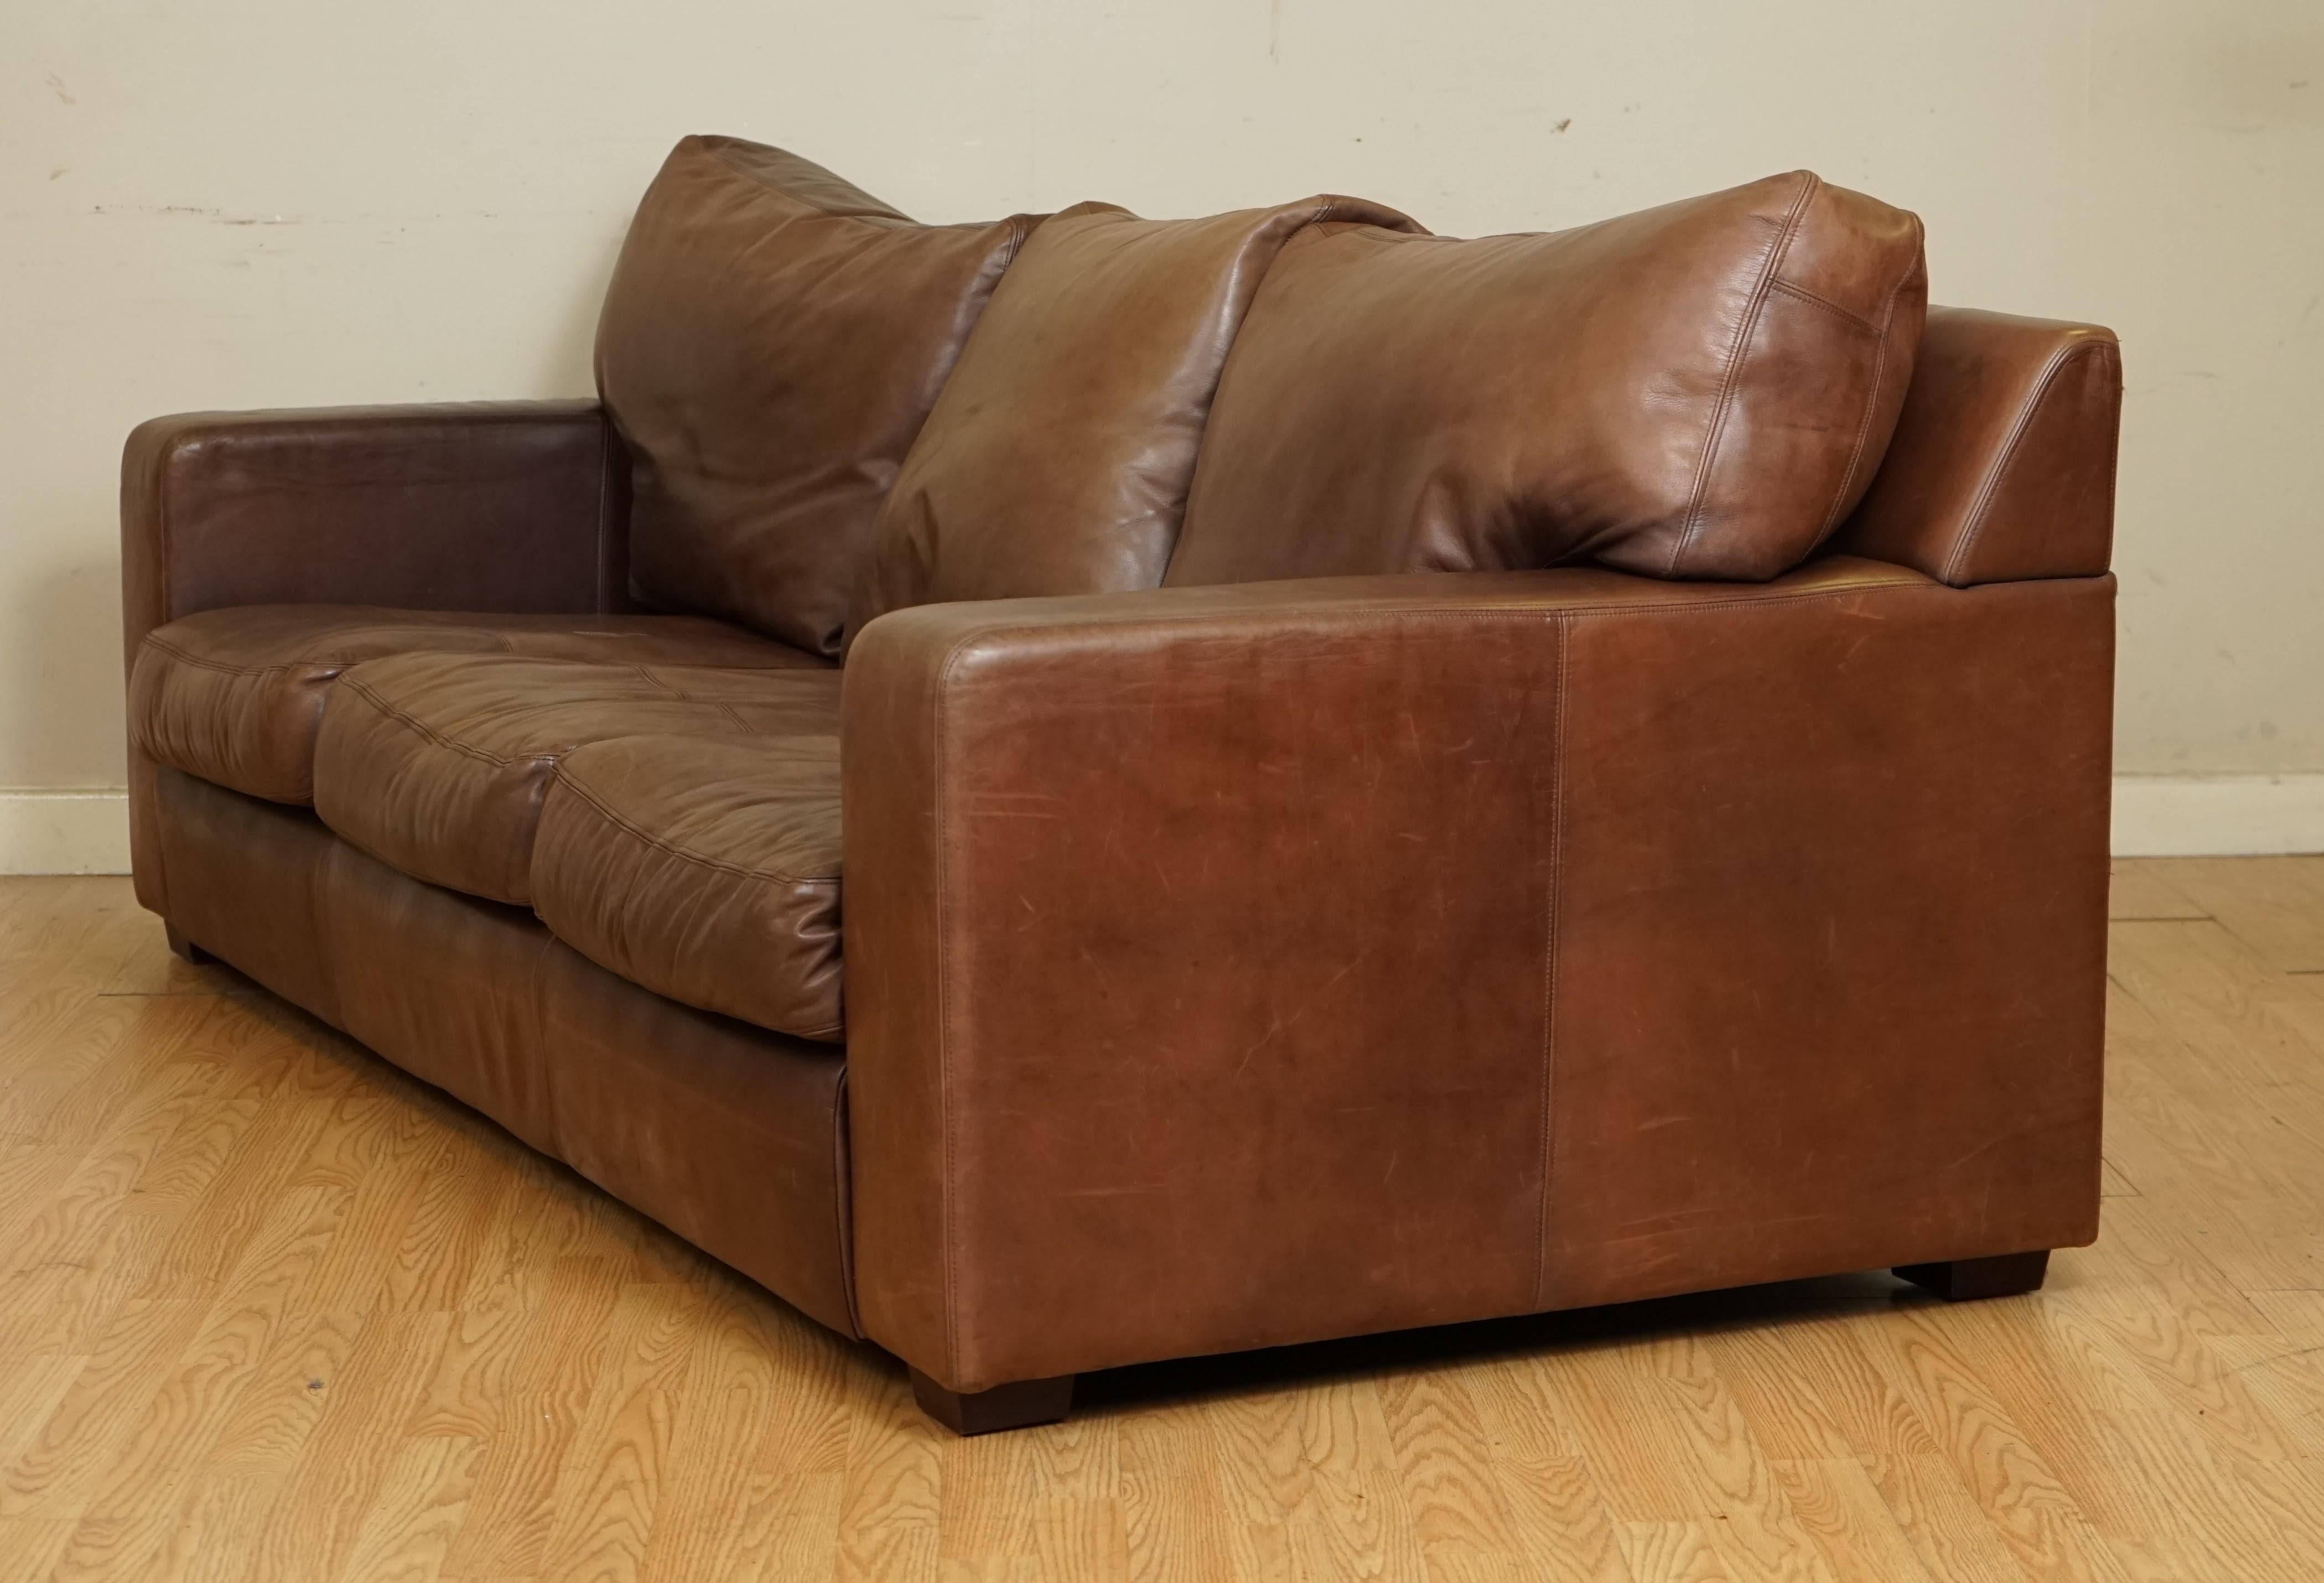 Collins & Hayes Buttery Soft Leather Three Seater Sofa with Feather Filled Back 5